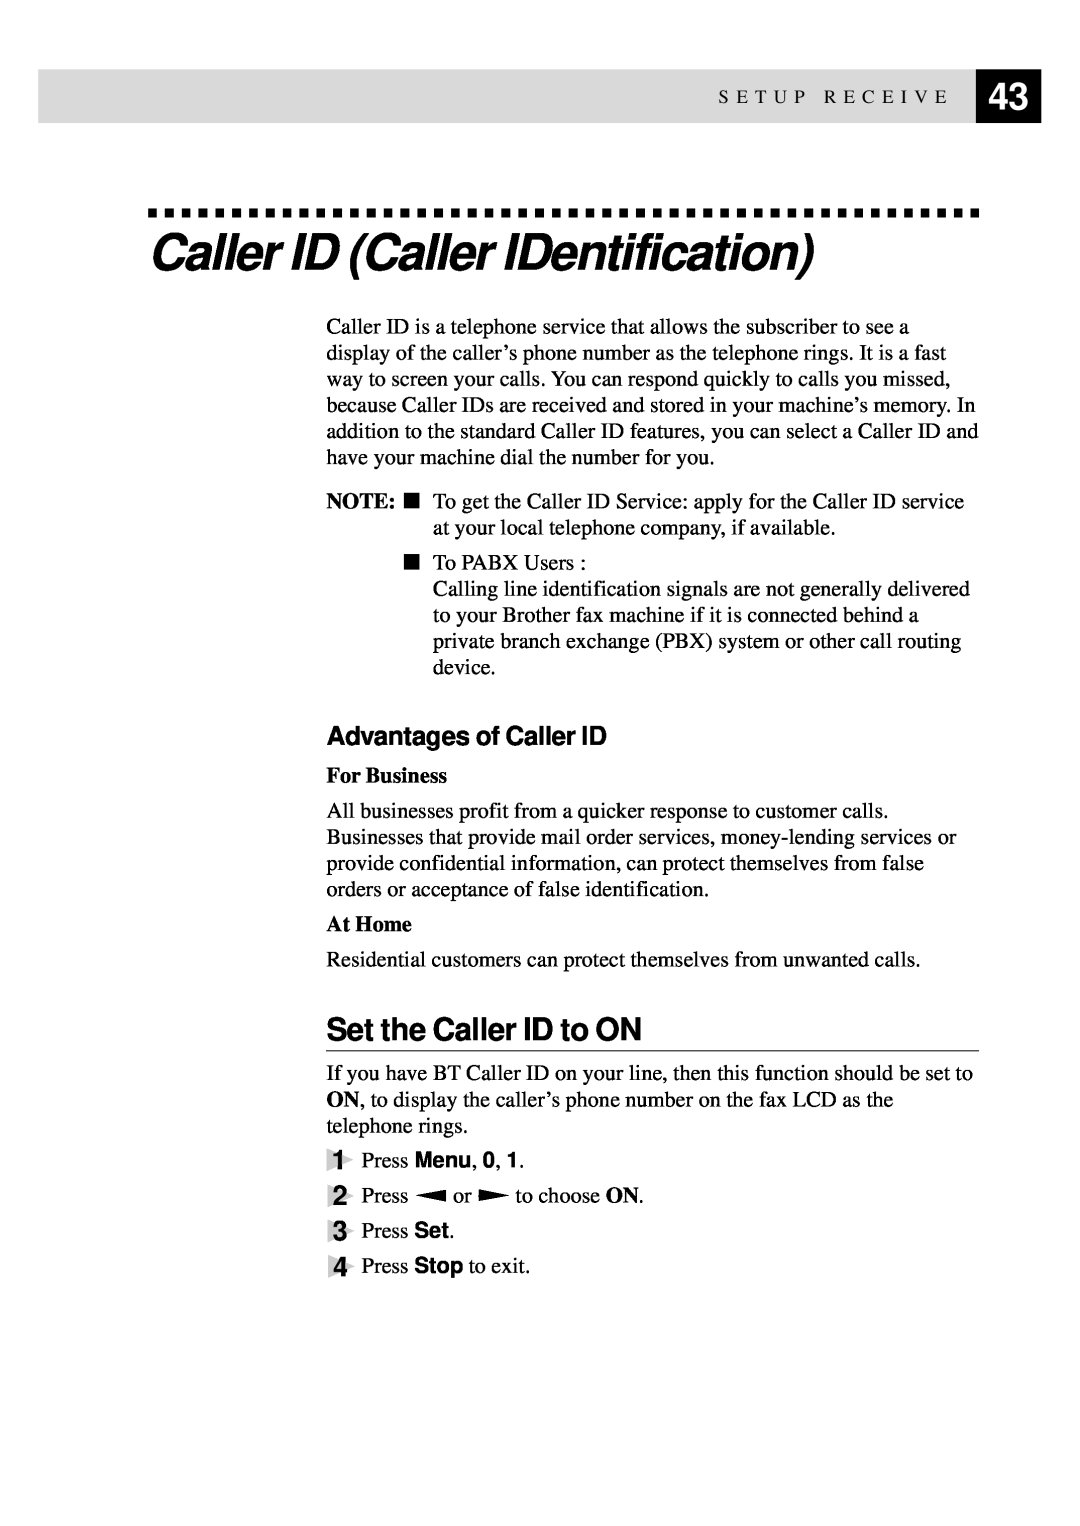 Brother 515 manual Caller ID Caller IDentification, Set the Caller ID to ON, Advantages of Caller ID, For Business, At Home 